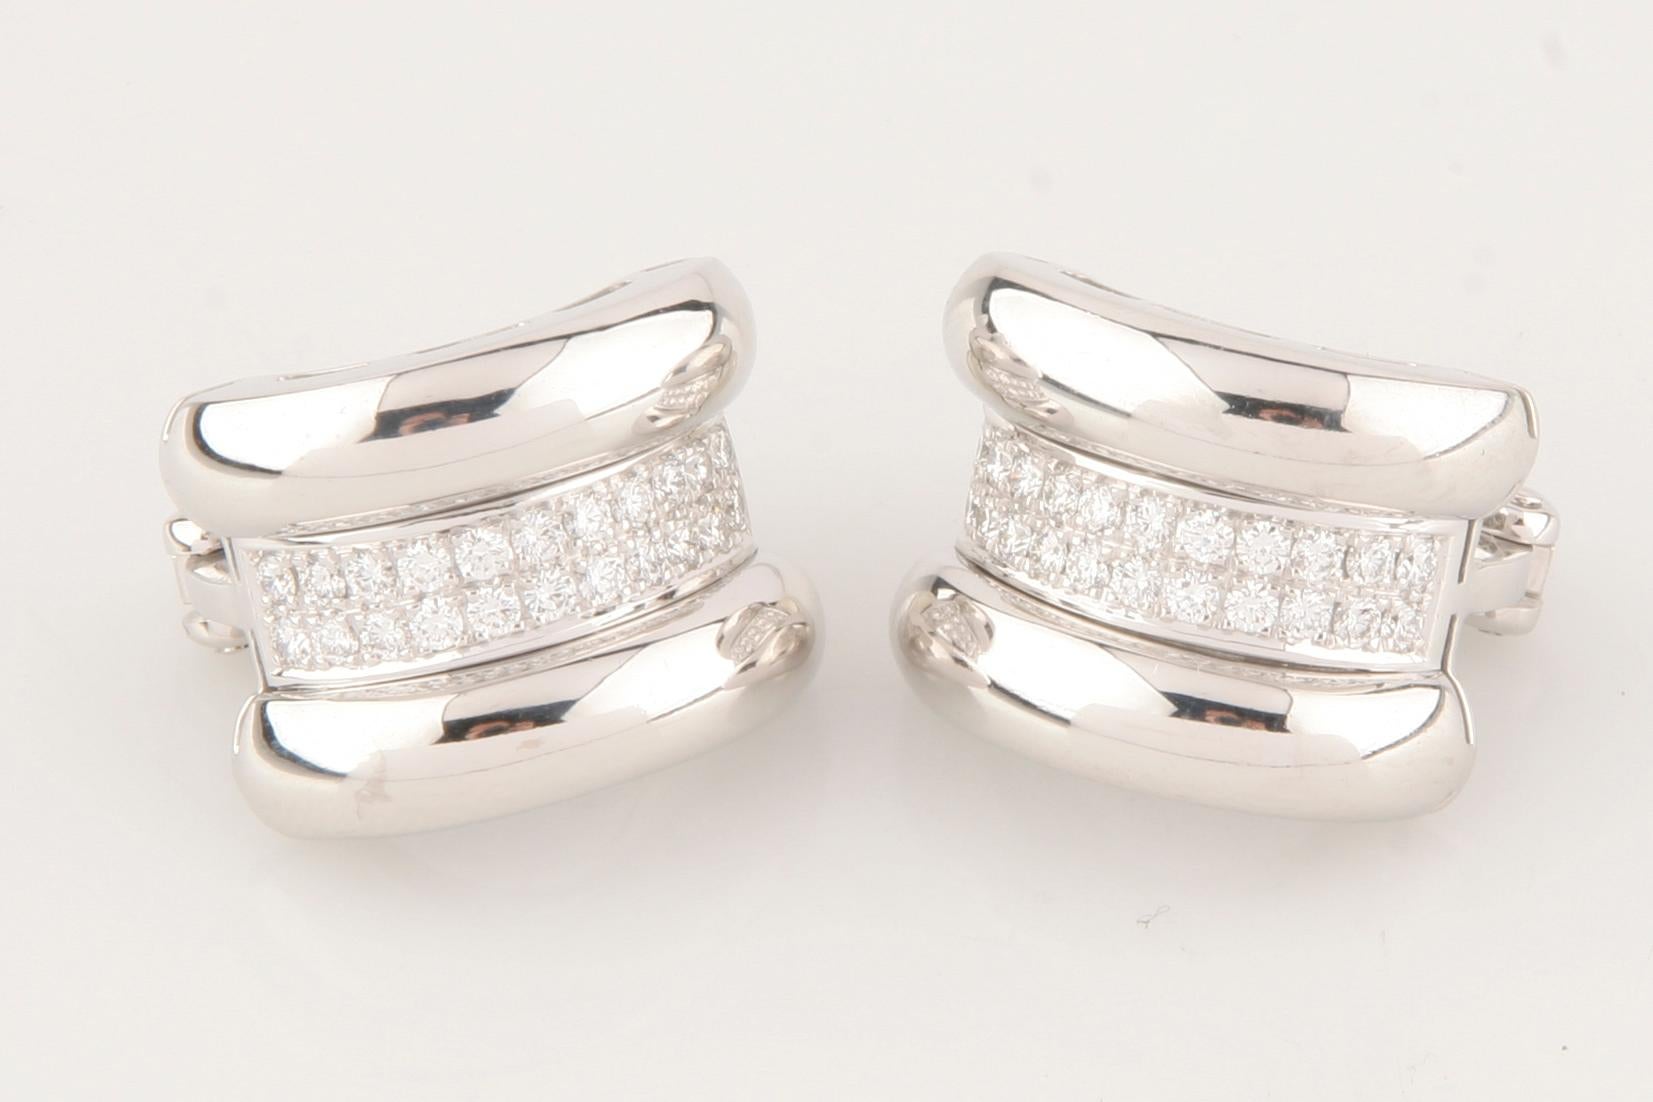 Two Rows of 44 Pavé-Set Round Diamonds in a Curved Setting w/ White Gold Bezel
TDW = 0.92 ct
19 mm Long x 15 mm Wide
Total Mass = 20.5 grams
Reverse Hallmarked w/ 